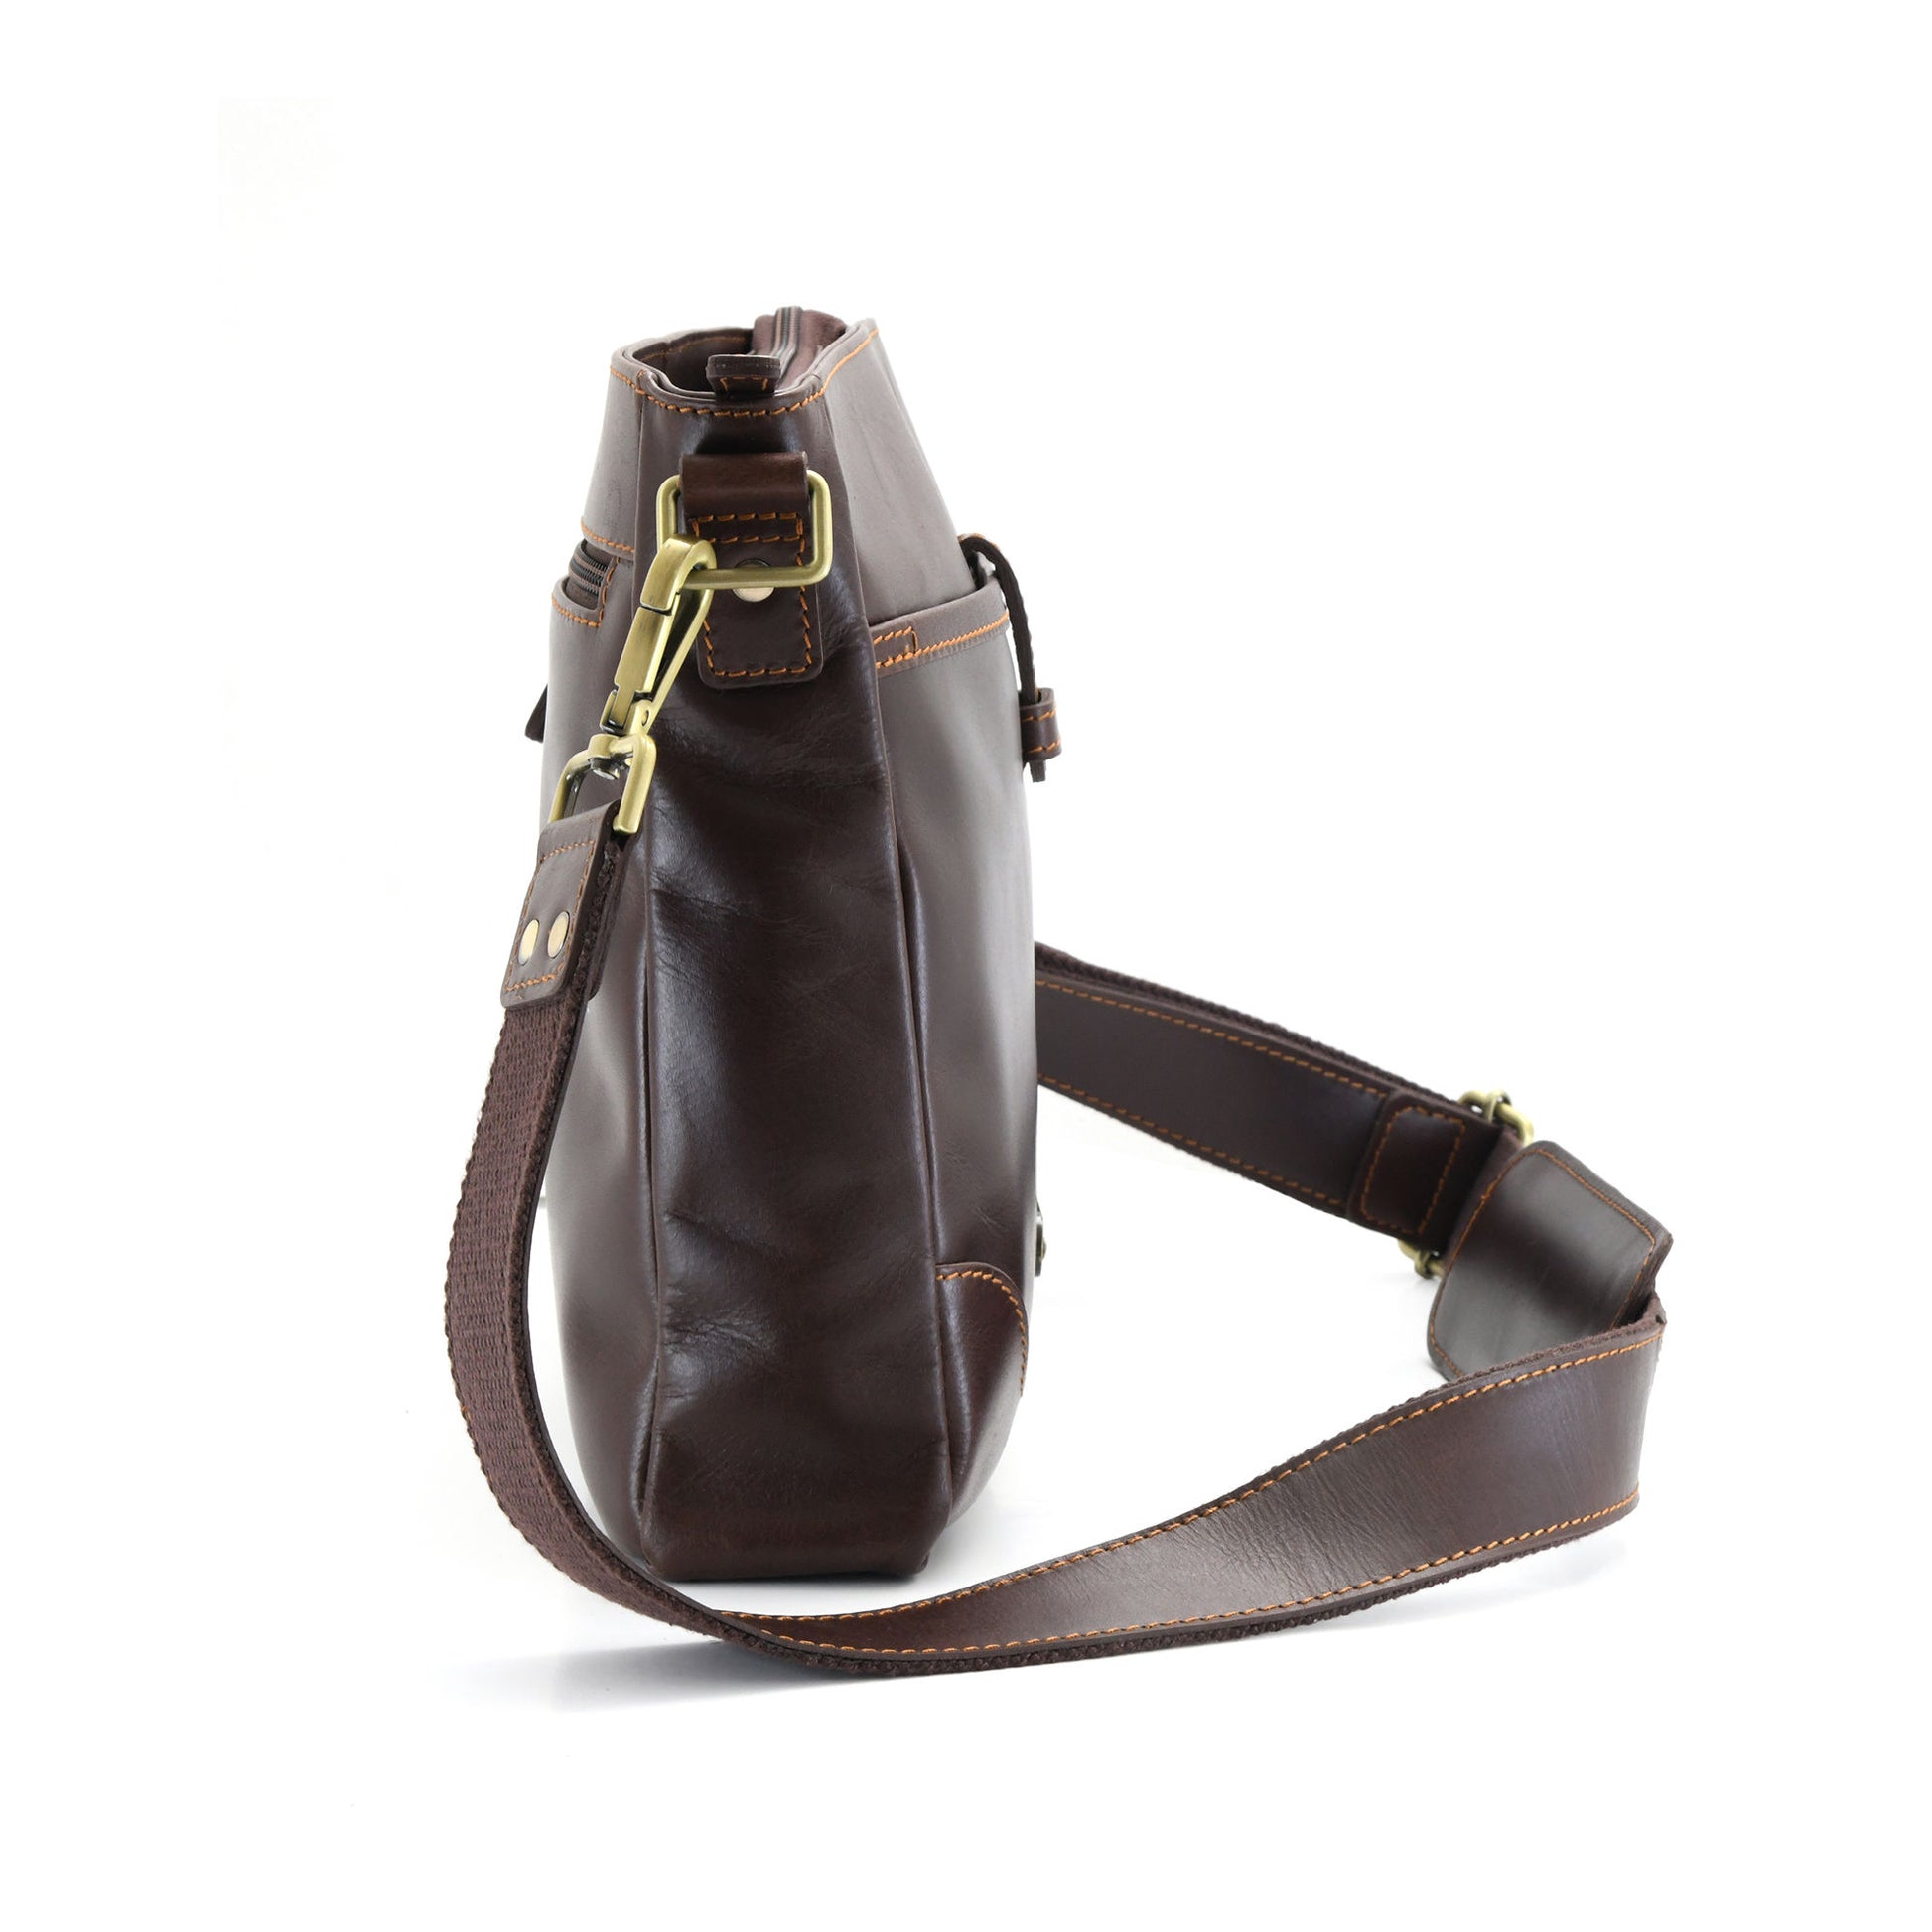 Style n Craft 392001 Cross-body Messenger Bag in Full Grain Dark Brown Leather - Side View showing the Side Profile